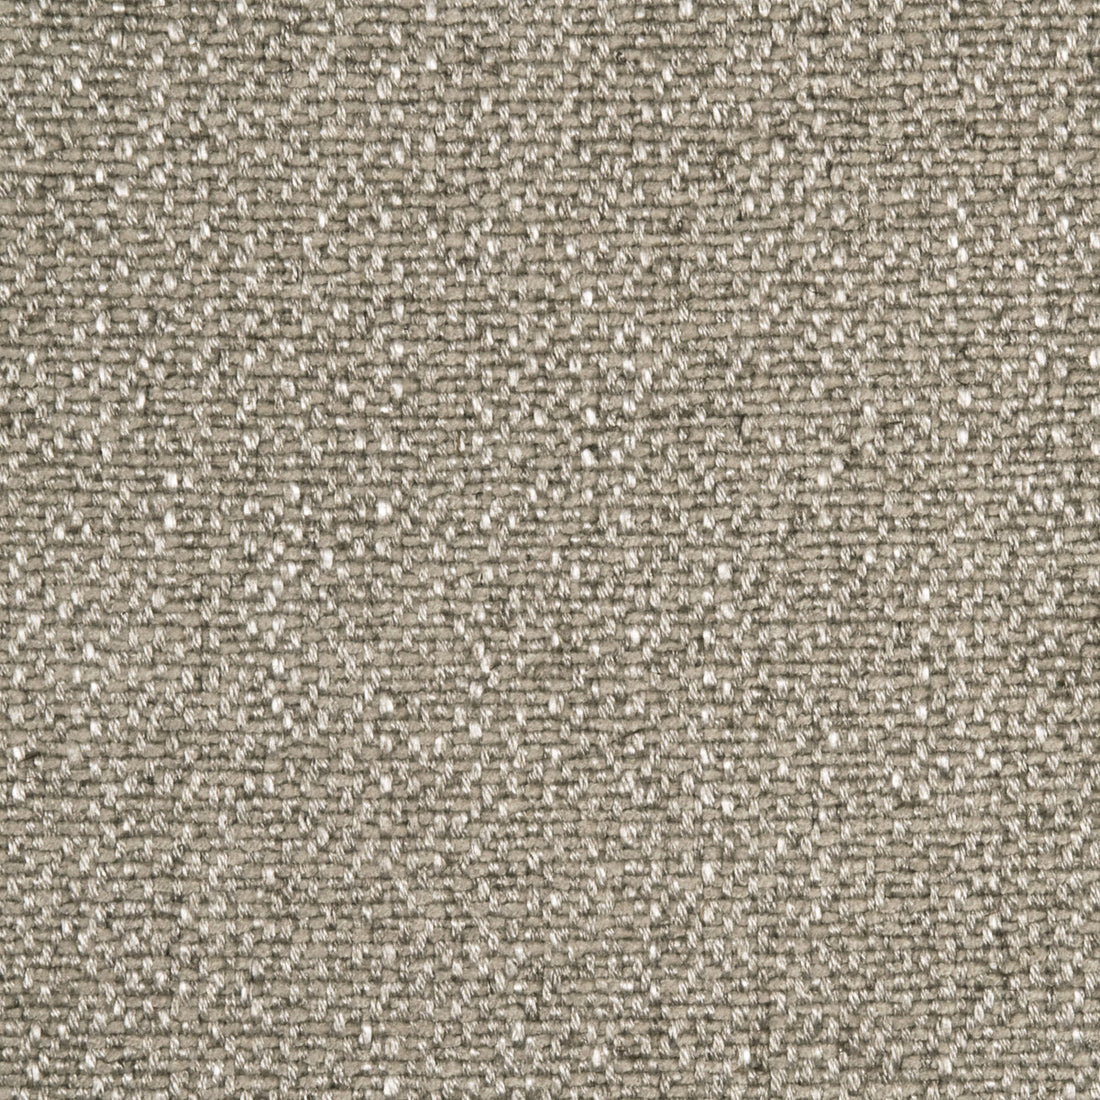 Verdure fabric in oatmeal color - pattern ED85175.230.0 - by Threads in the Threads Colour Library collection